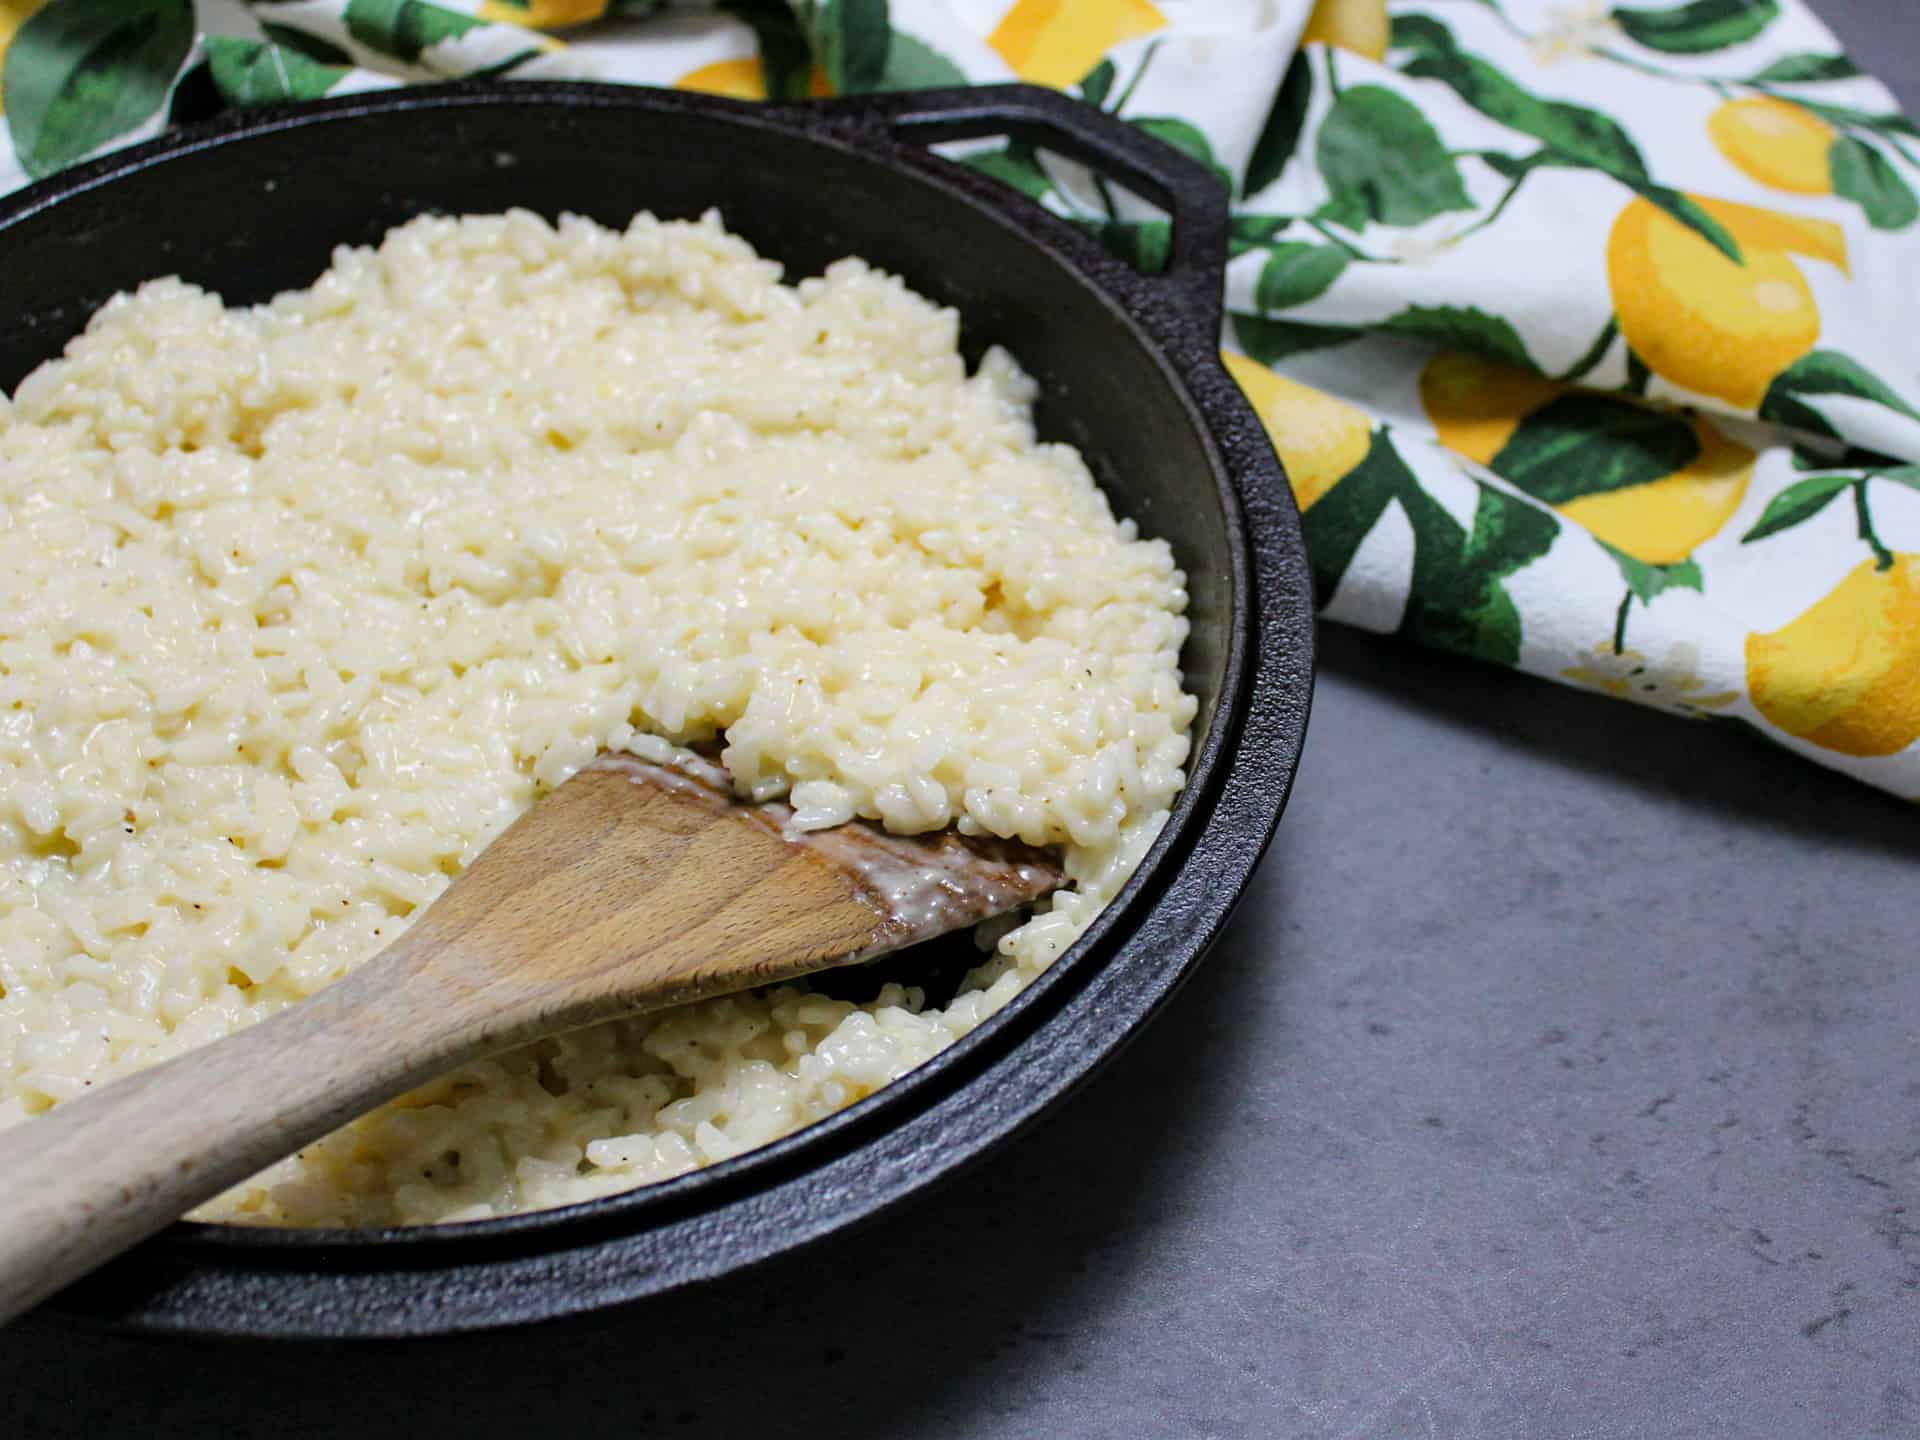 A cast iron pan filled with creamy risotto made from scratch